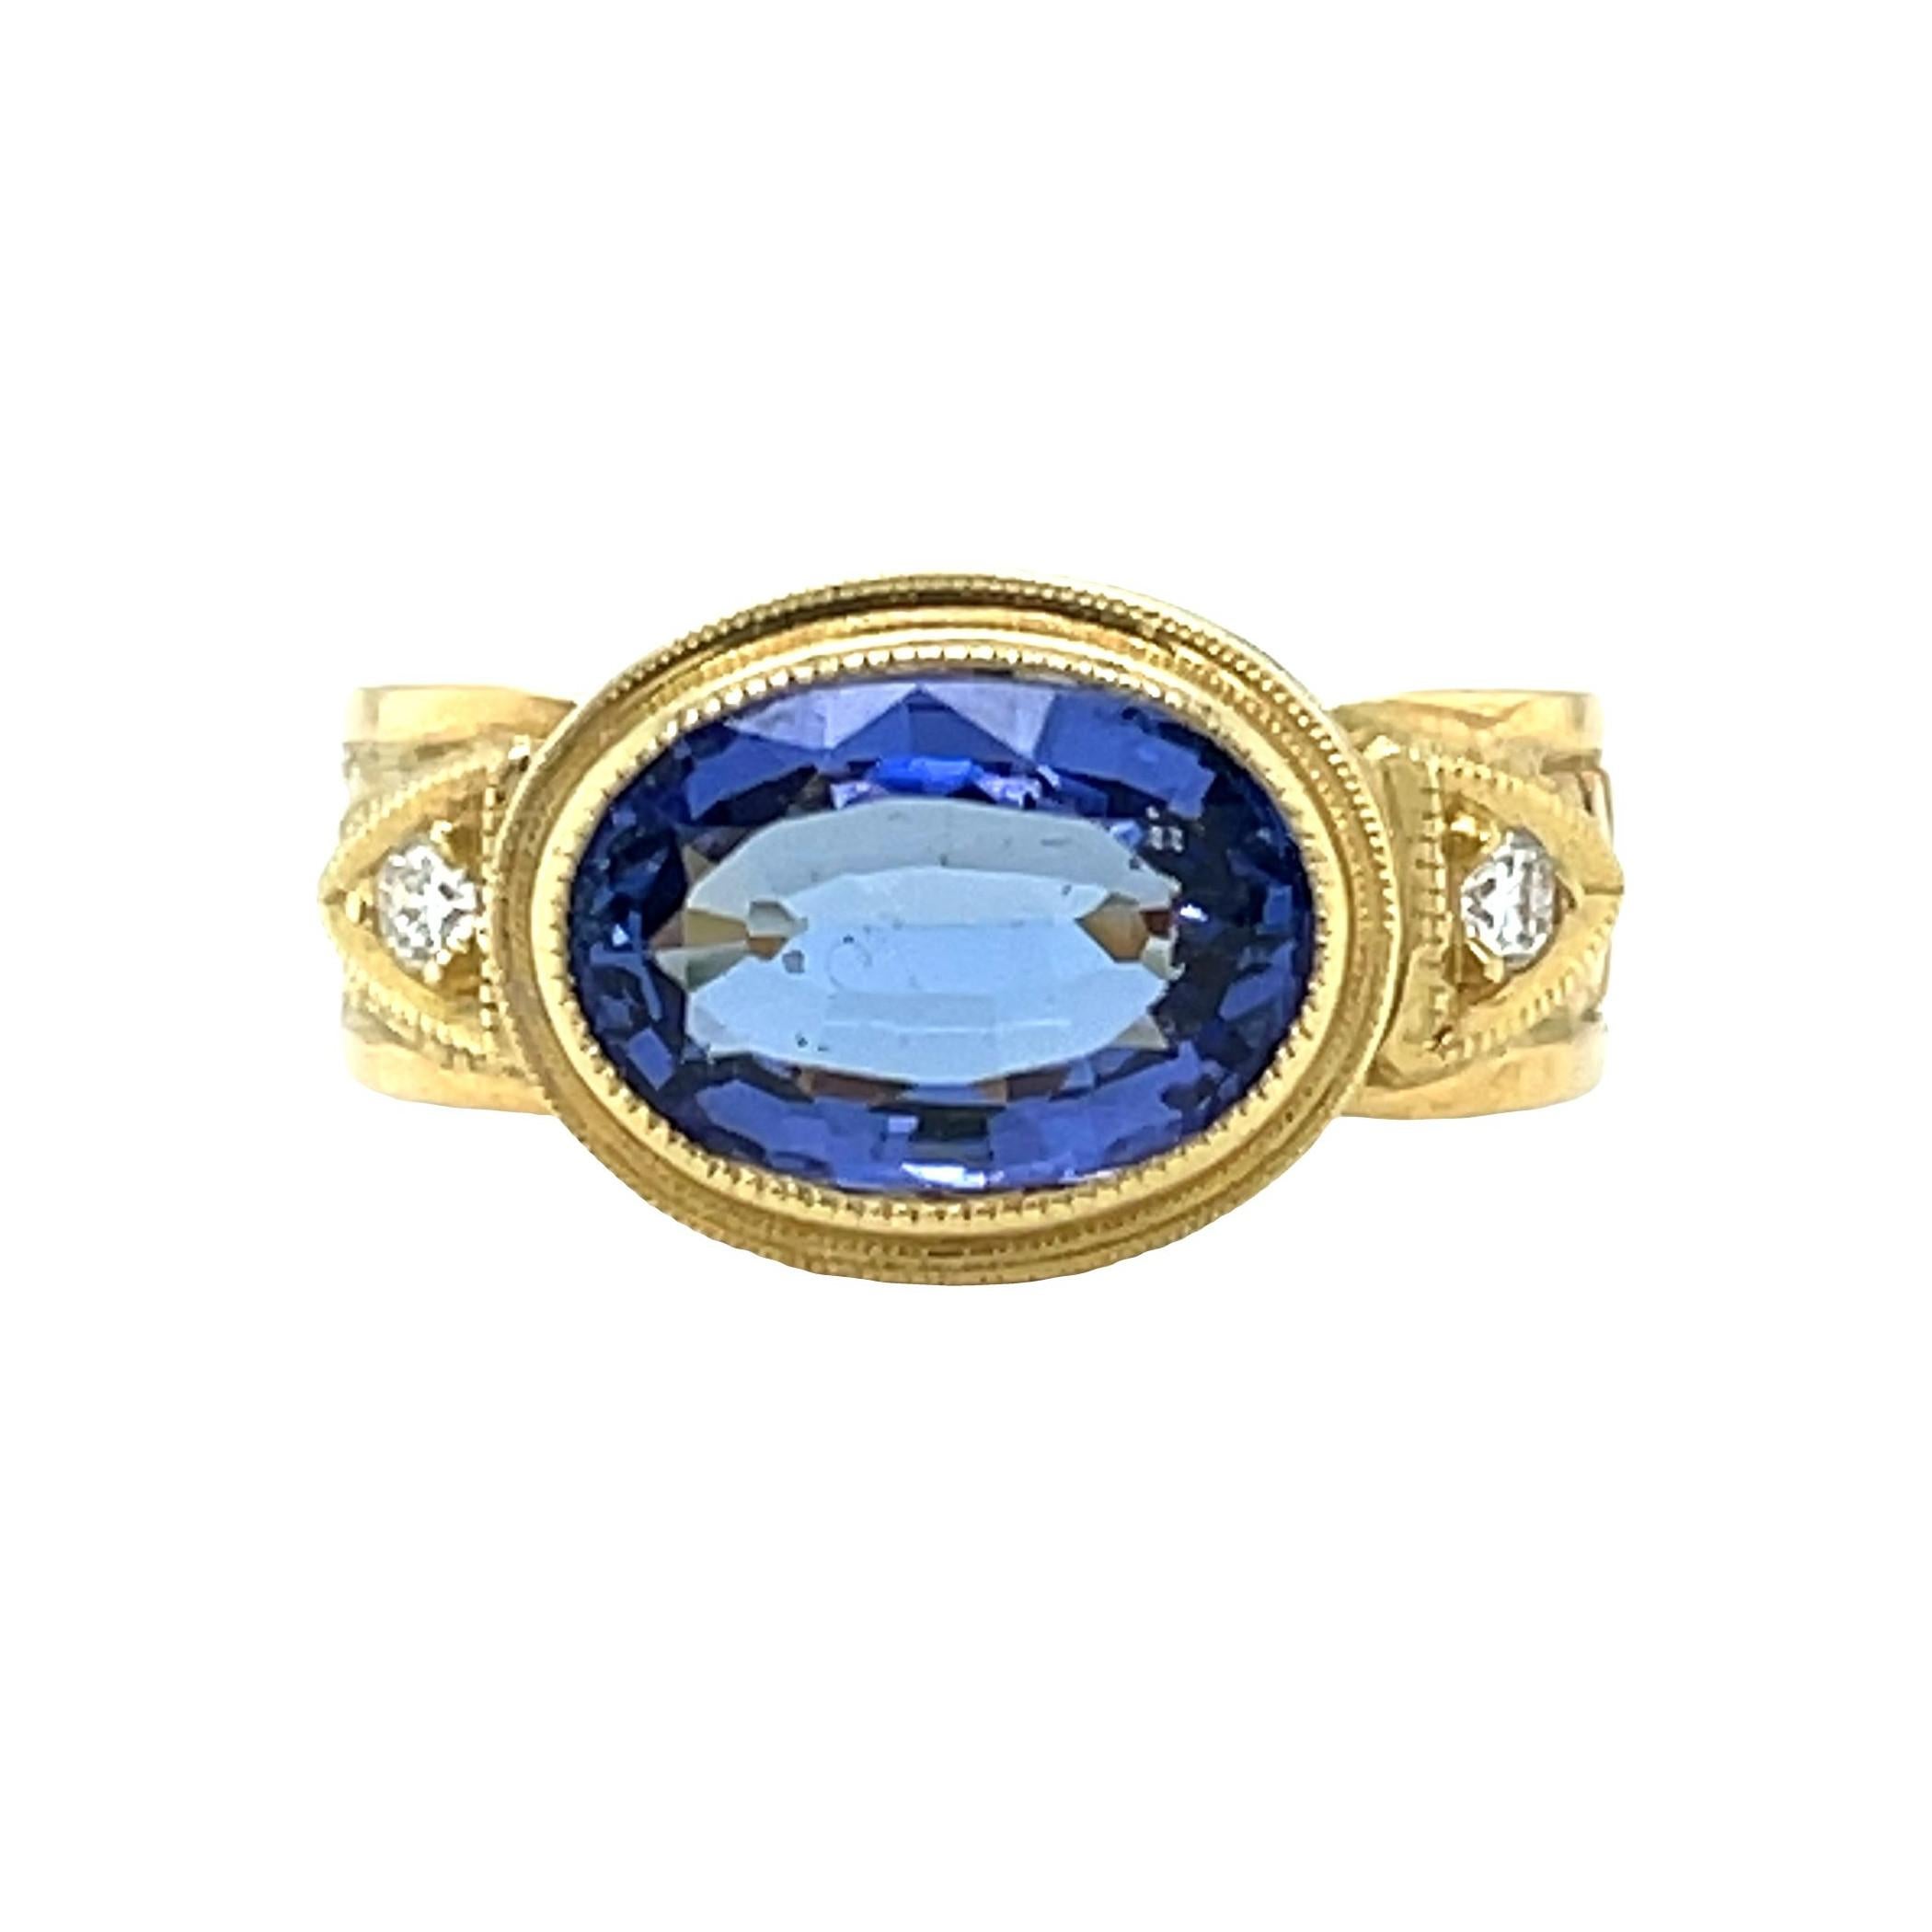 This handmade 18k yellow gold ring features a lovely periwinkle color tanzanite. It has been set 